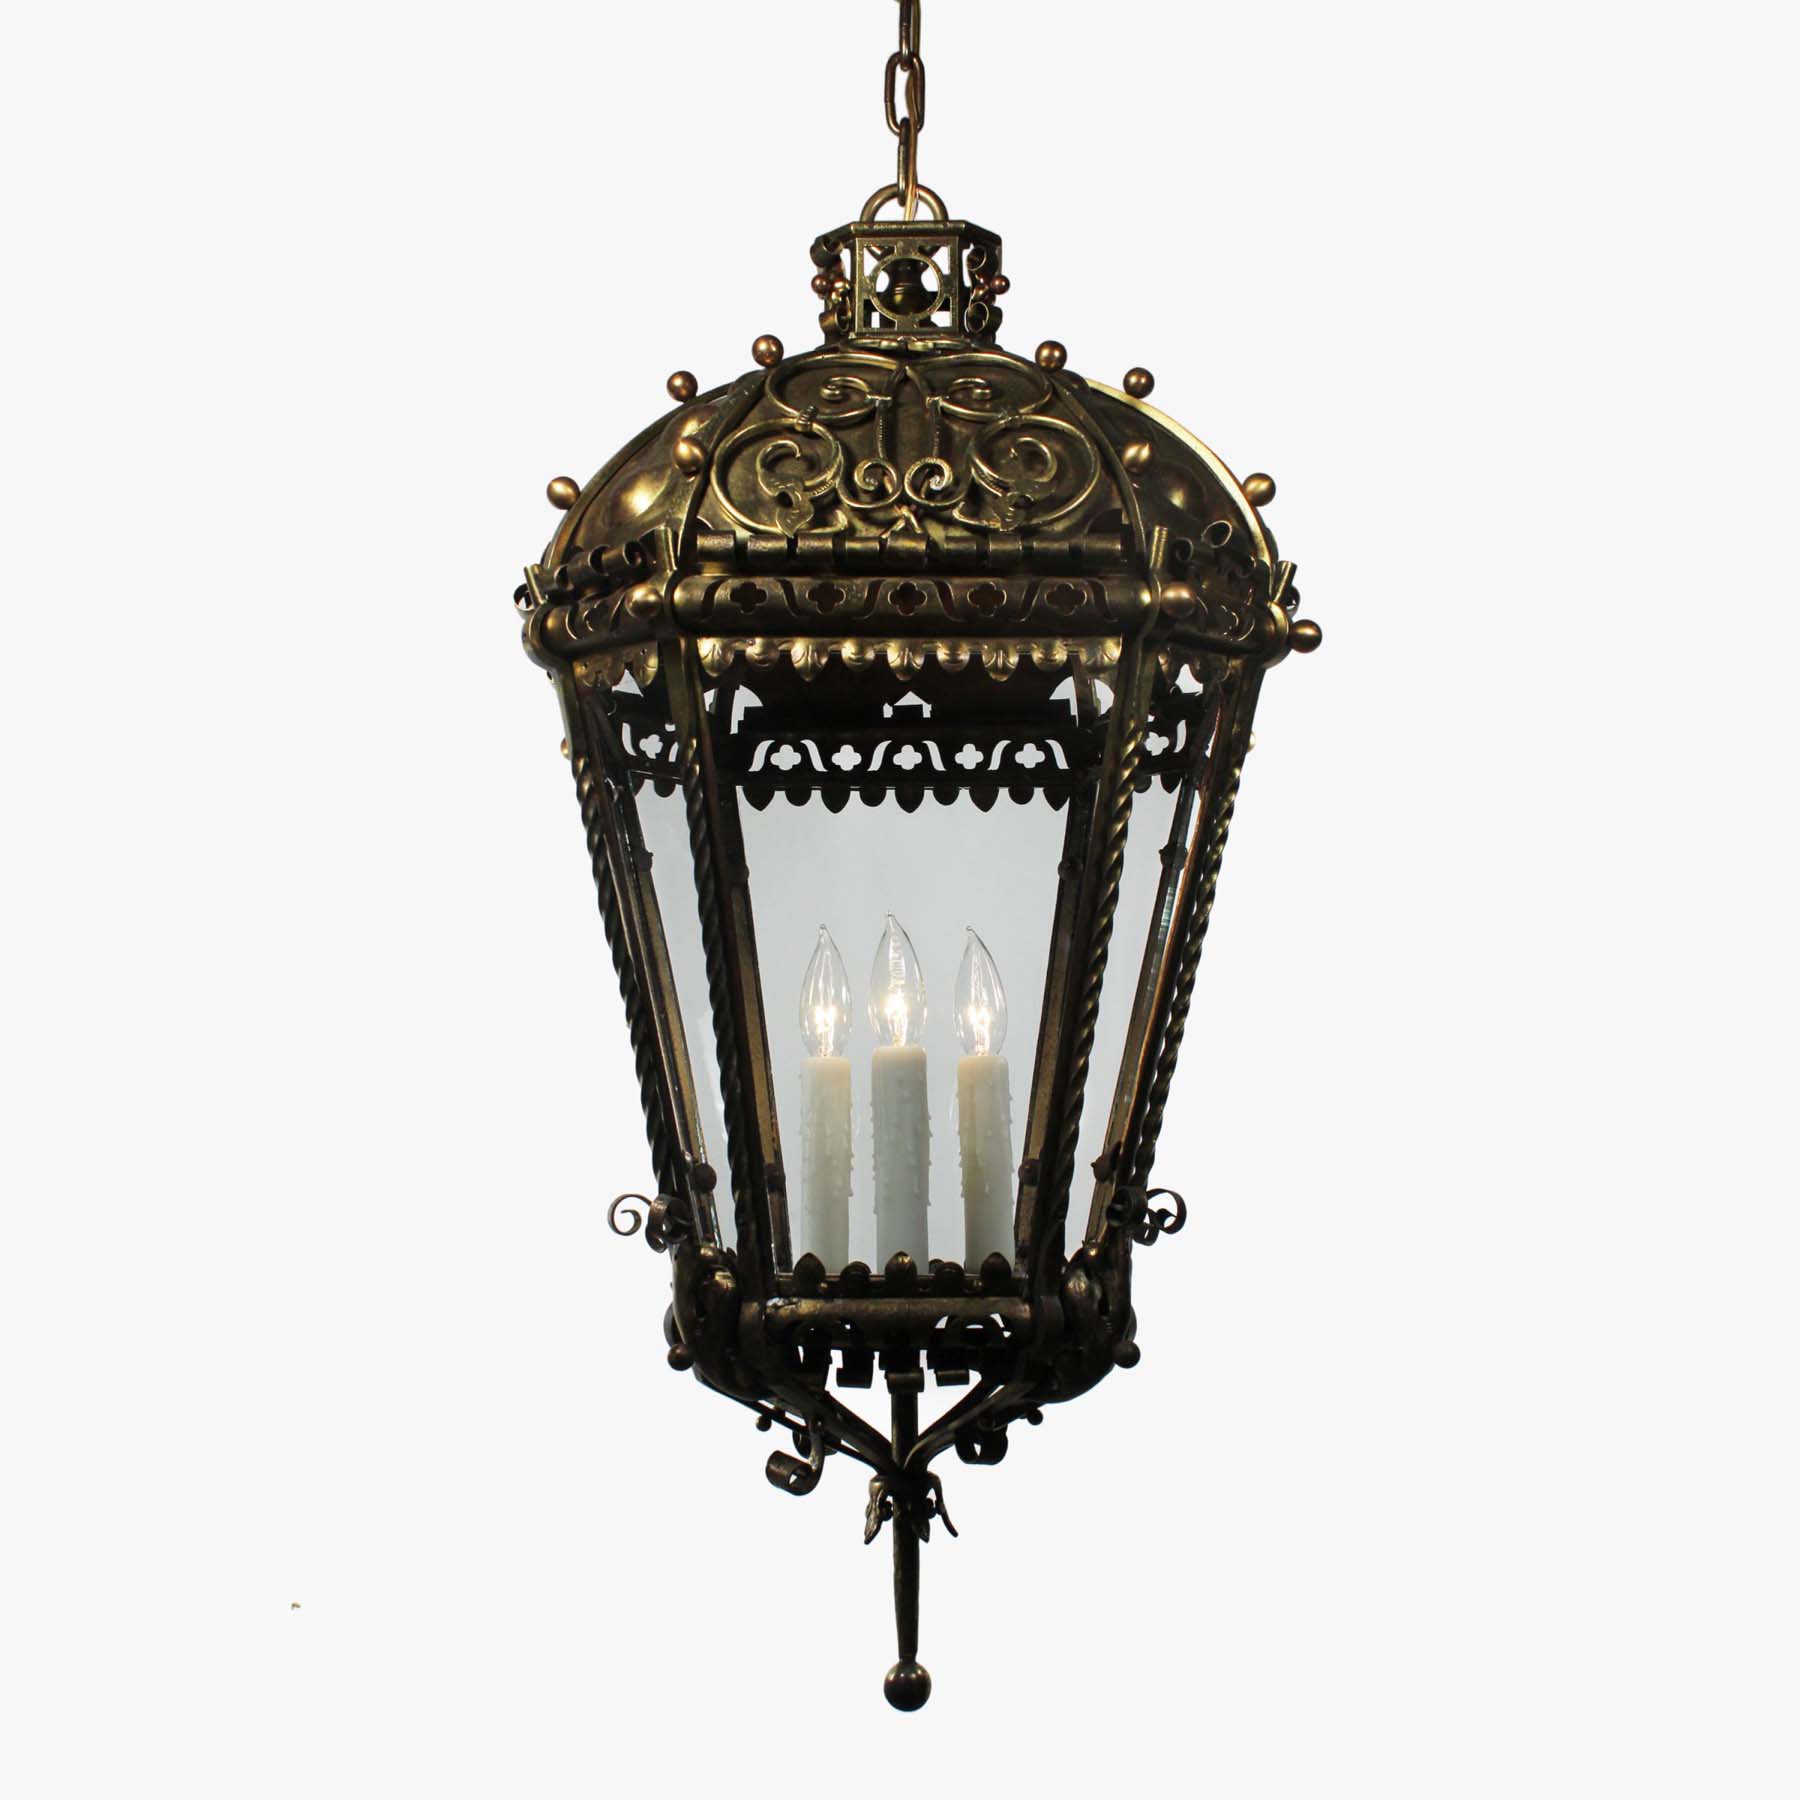 SOLD Substantial Antique Brass Three-Light Lantern Chandelier, Early 1900s-69661